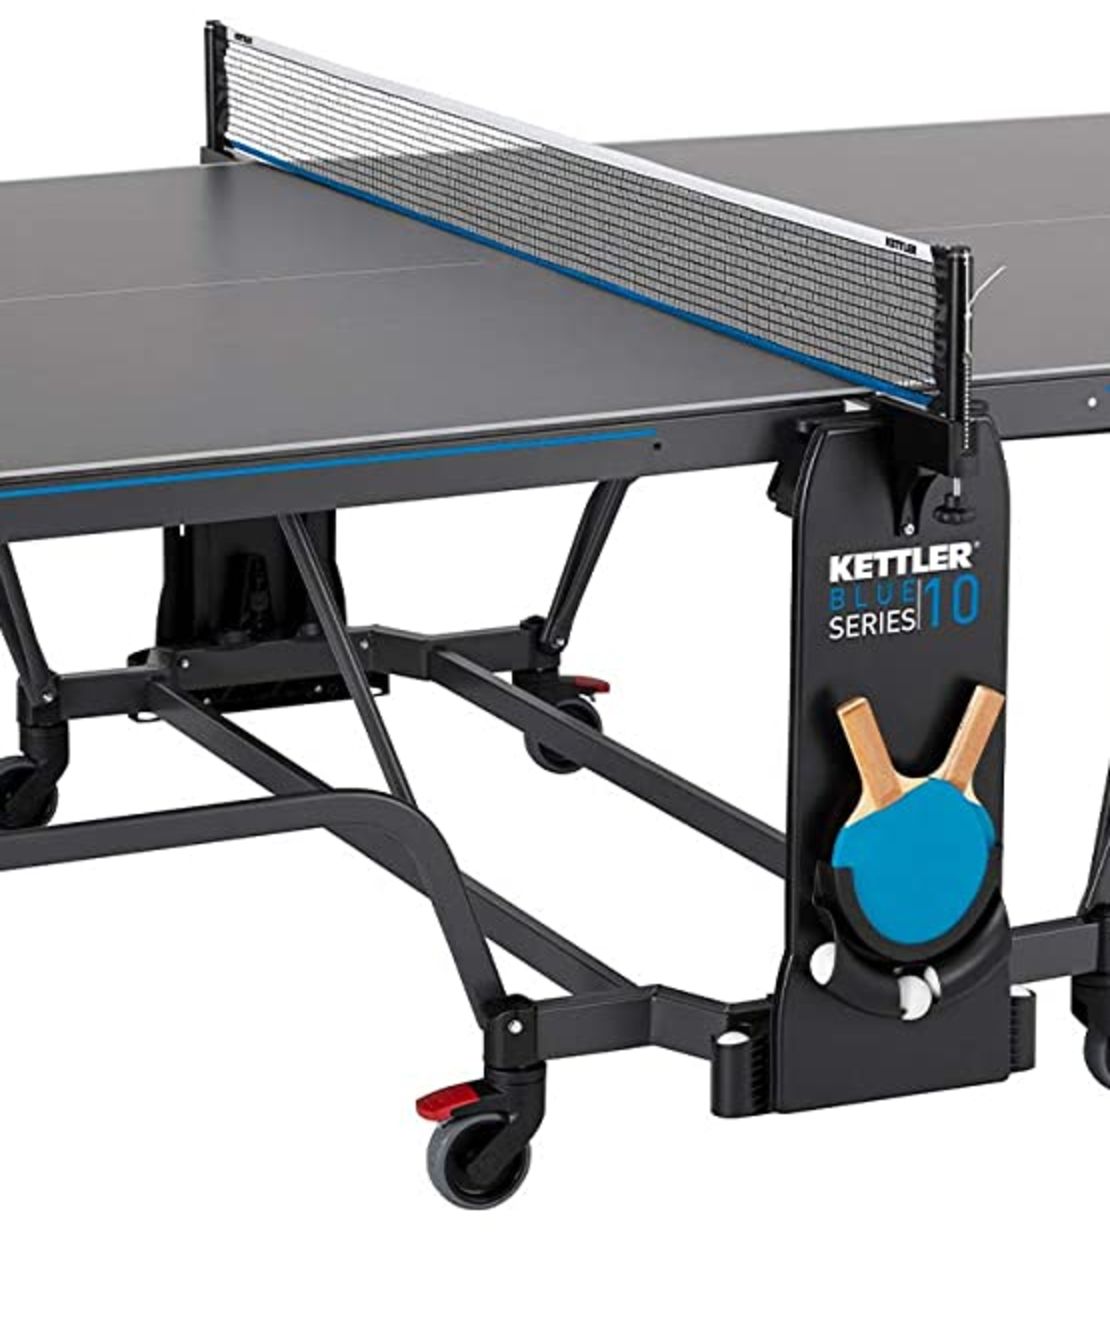 PING PONG TABLE Outdoor K10